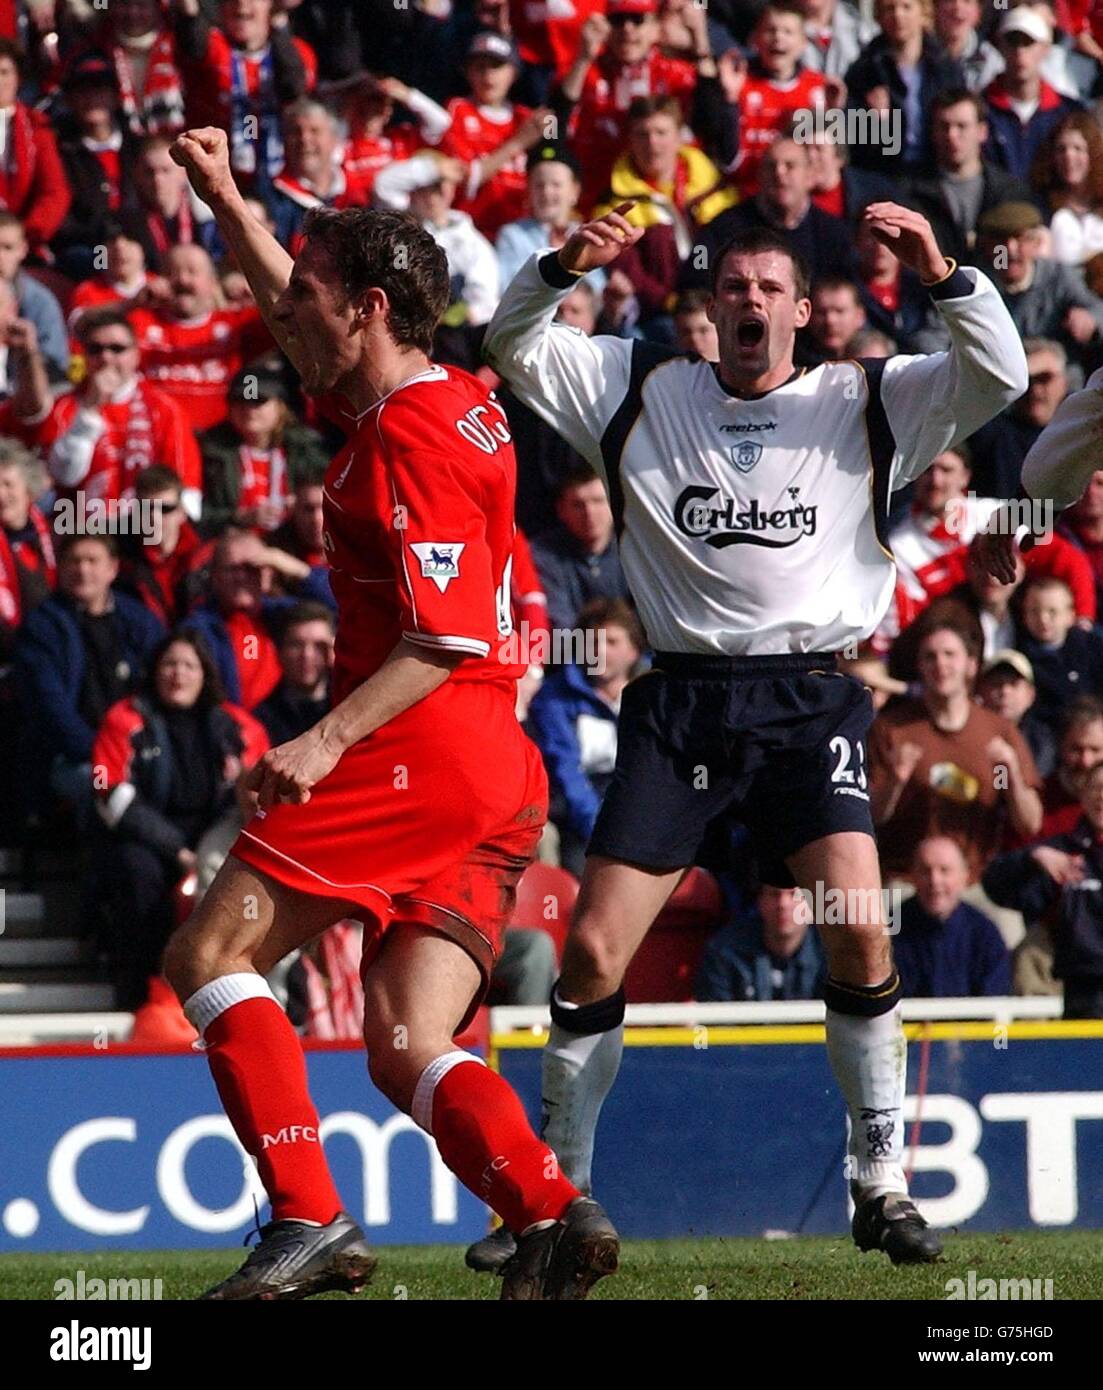 Middlesbrough's Gareth Southgate celebrates his teams goal against Liverpool during their FA Barclaycard Premiership match at Middlesbrough's Cellnet Riverside Stadium. ** Stock Photo